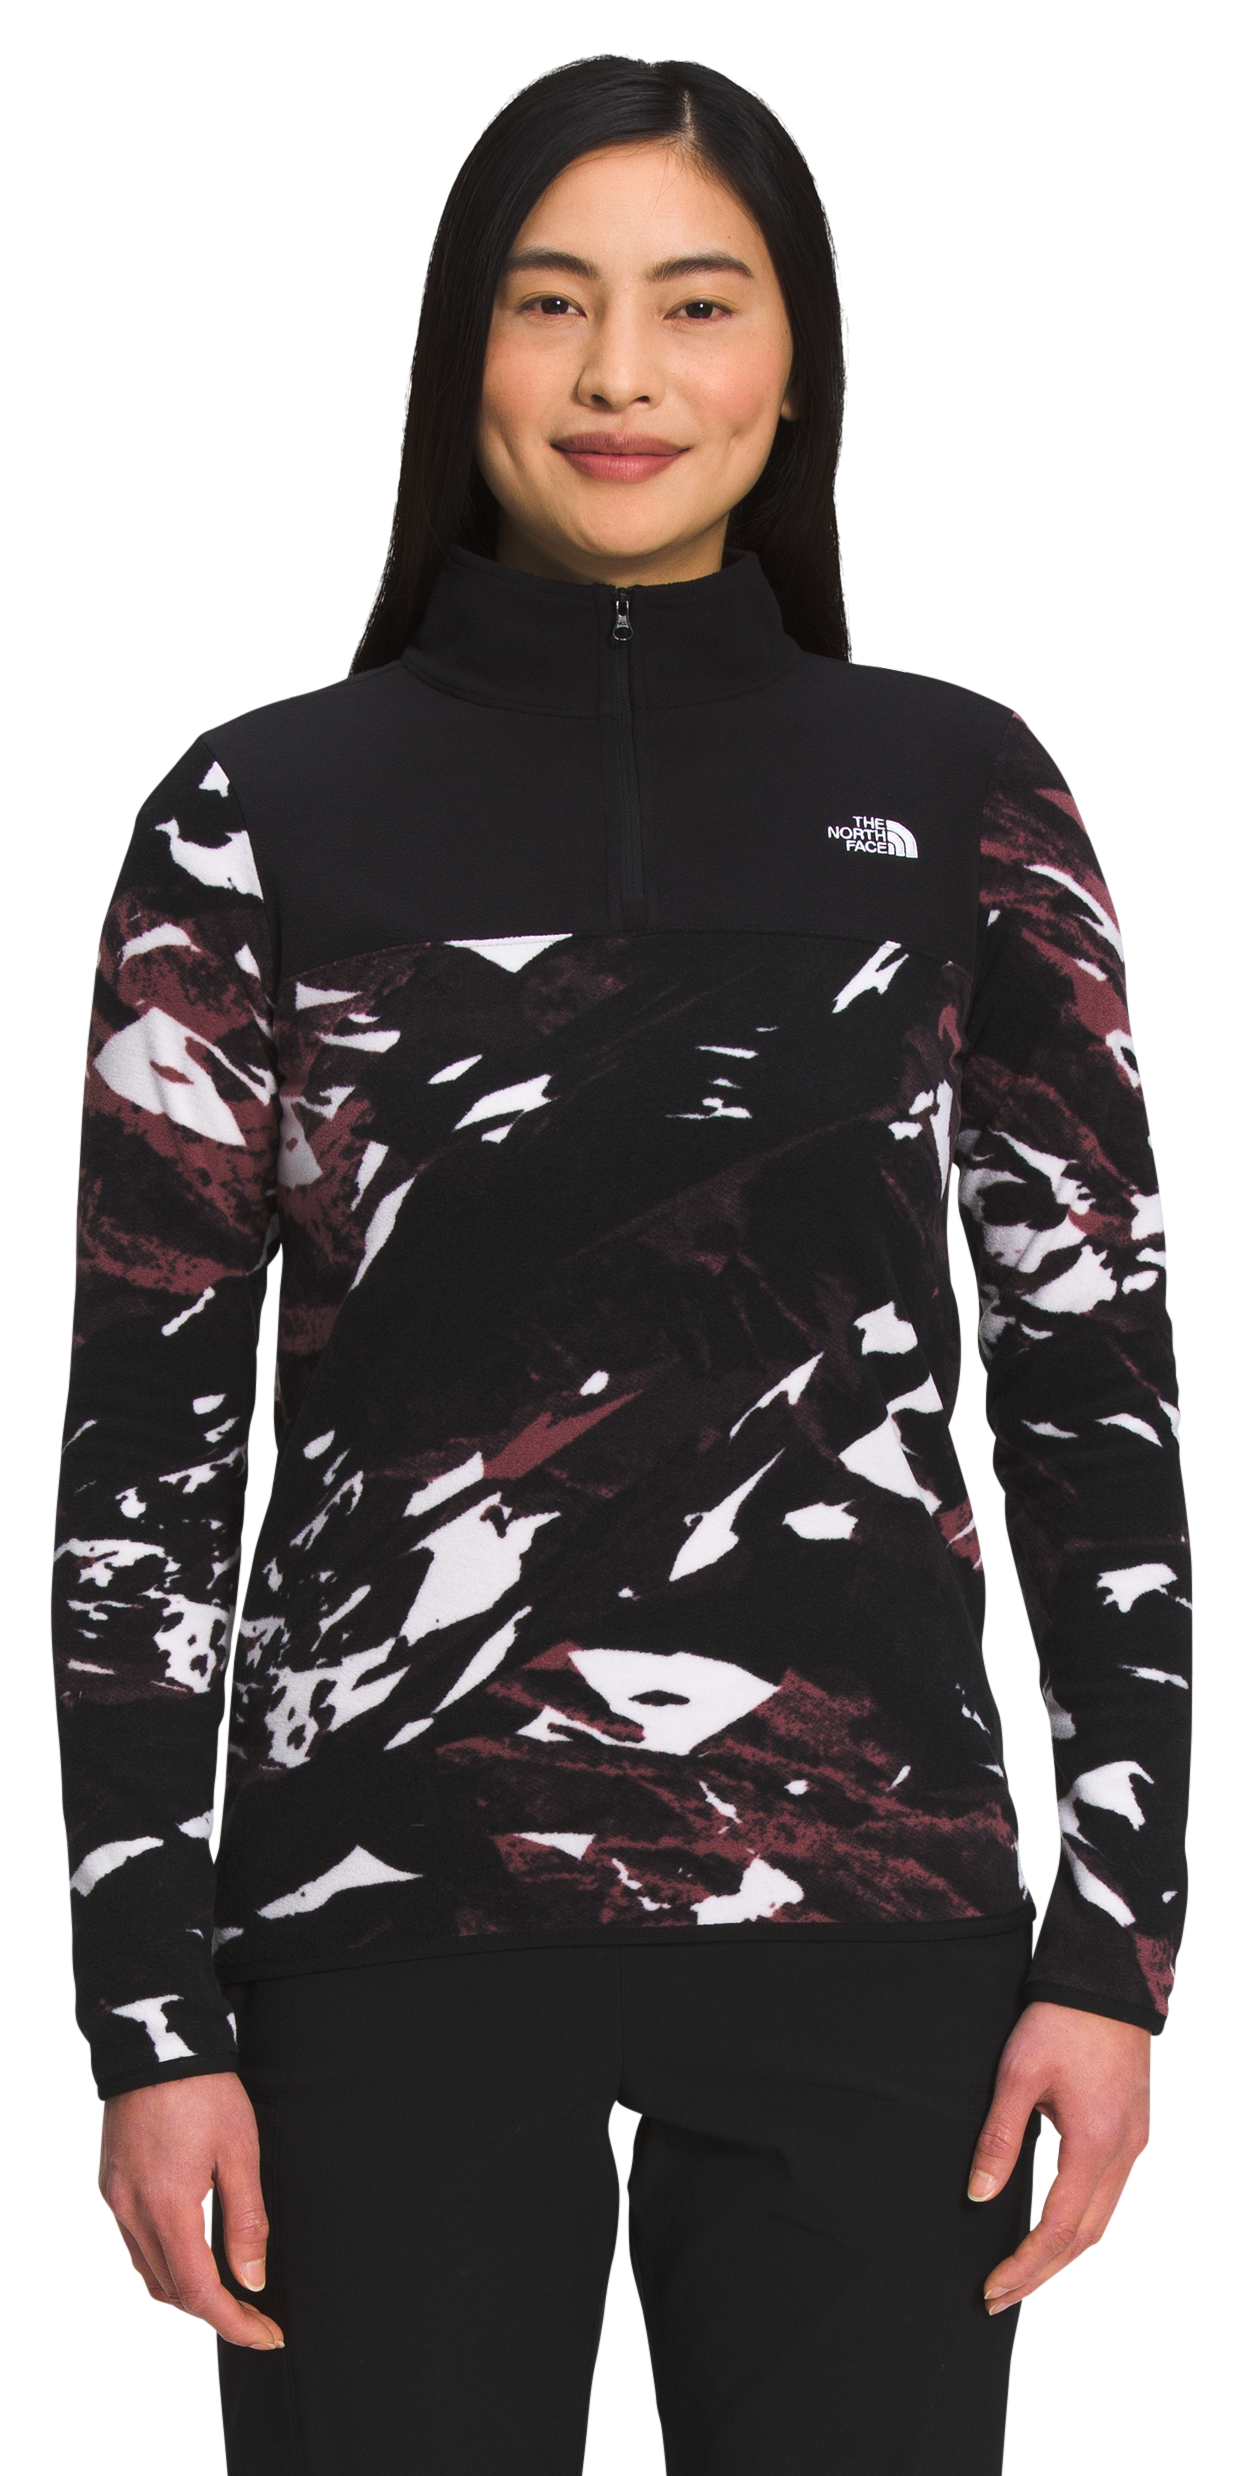 The North Face Printed TKA Glacier Quarter-Zip Long-Sleeve Pullover for Ladies - Wild Ginger Snowcap Mountains/TNF Black - M